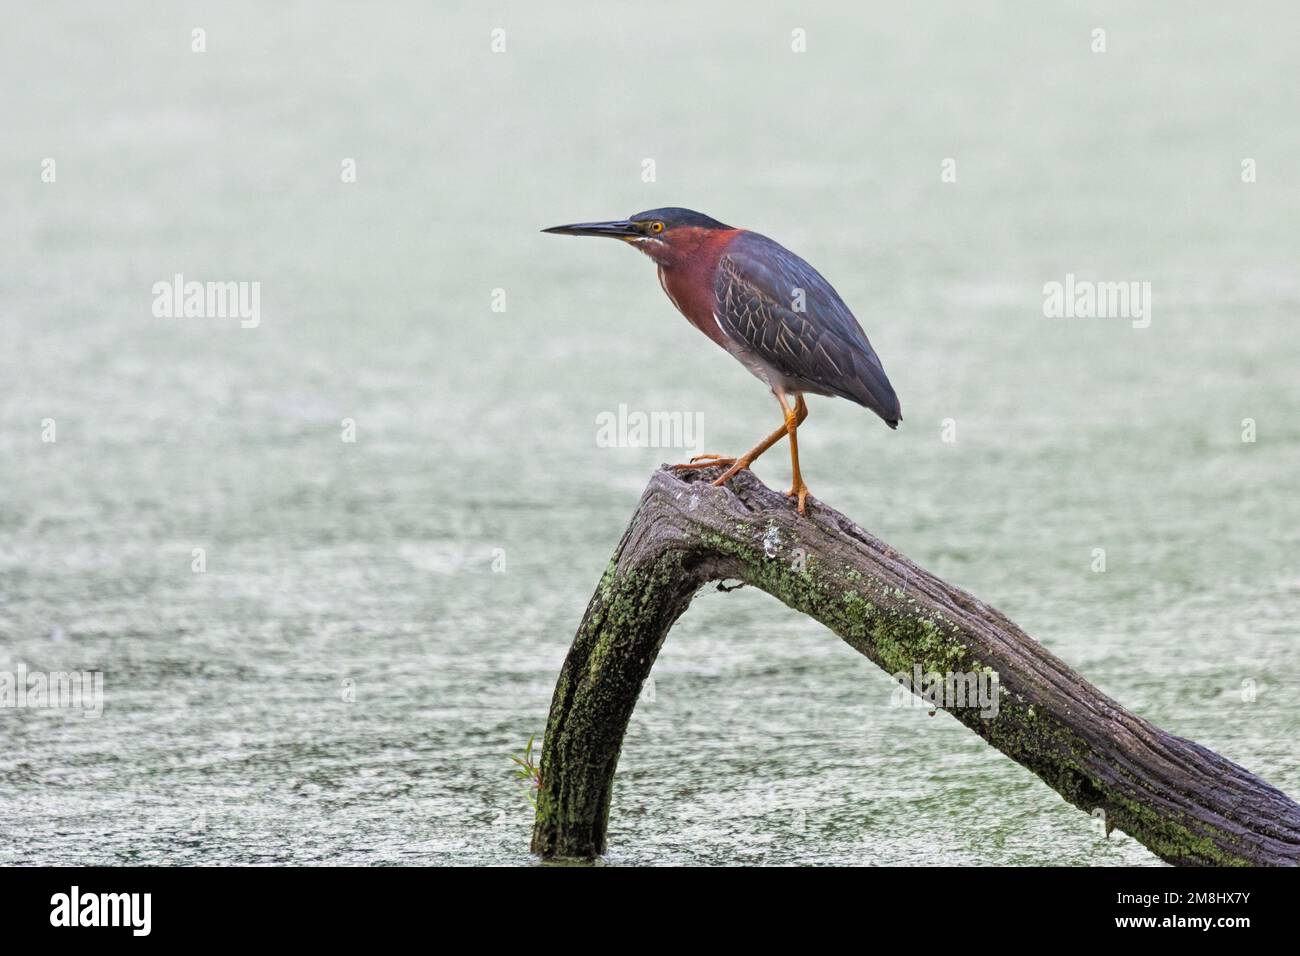 A green heron stands on a submerged log that is in a pond filled with duckweed Stock Photo